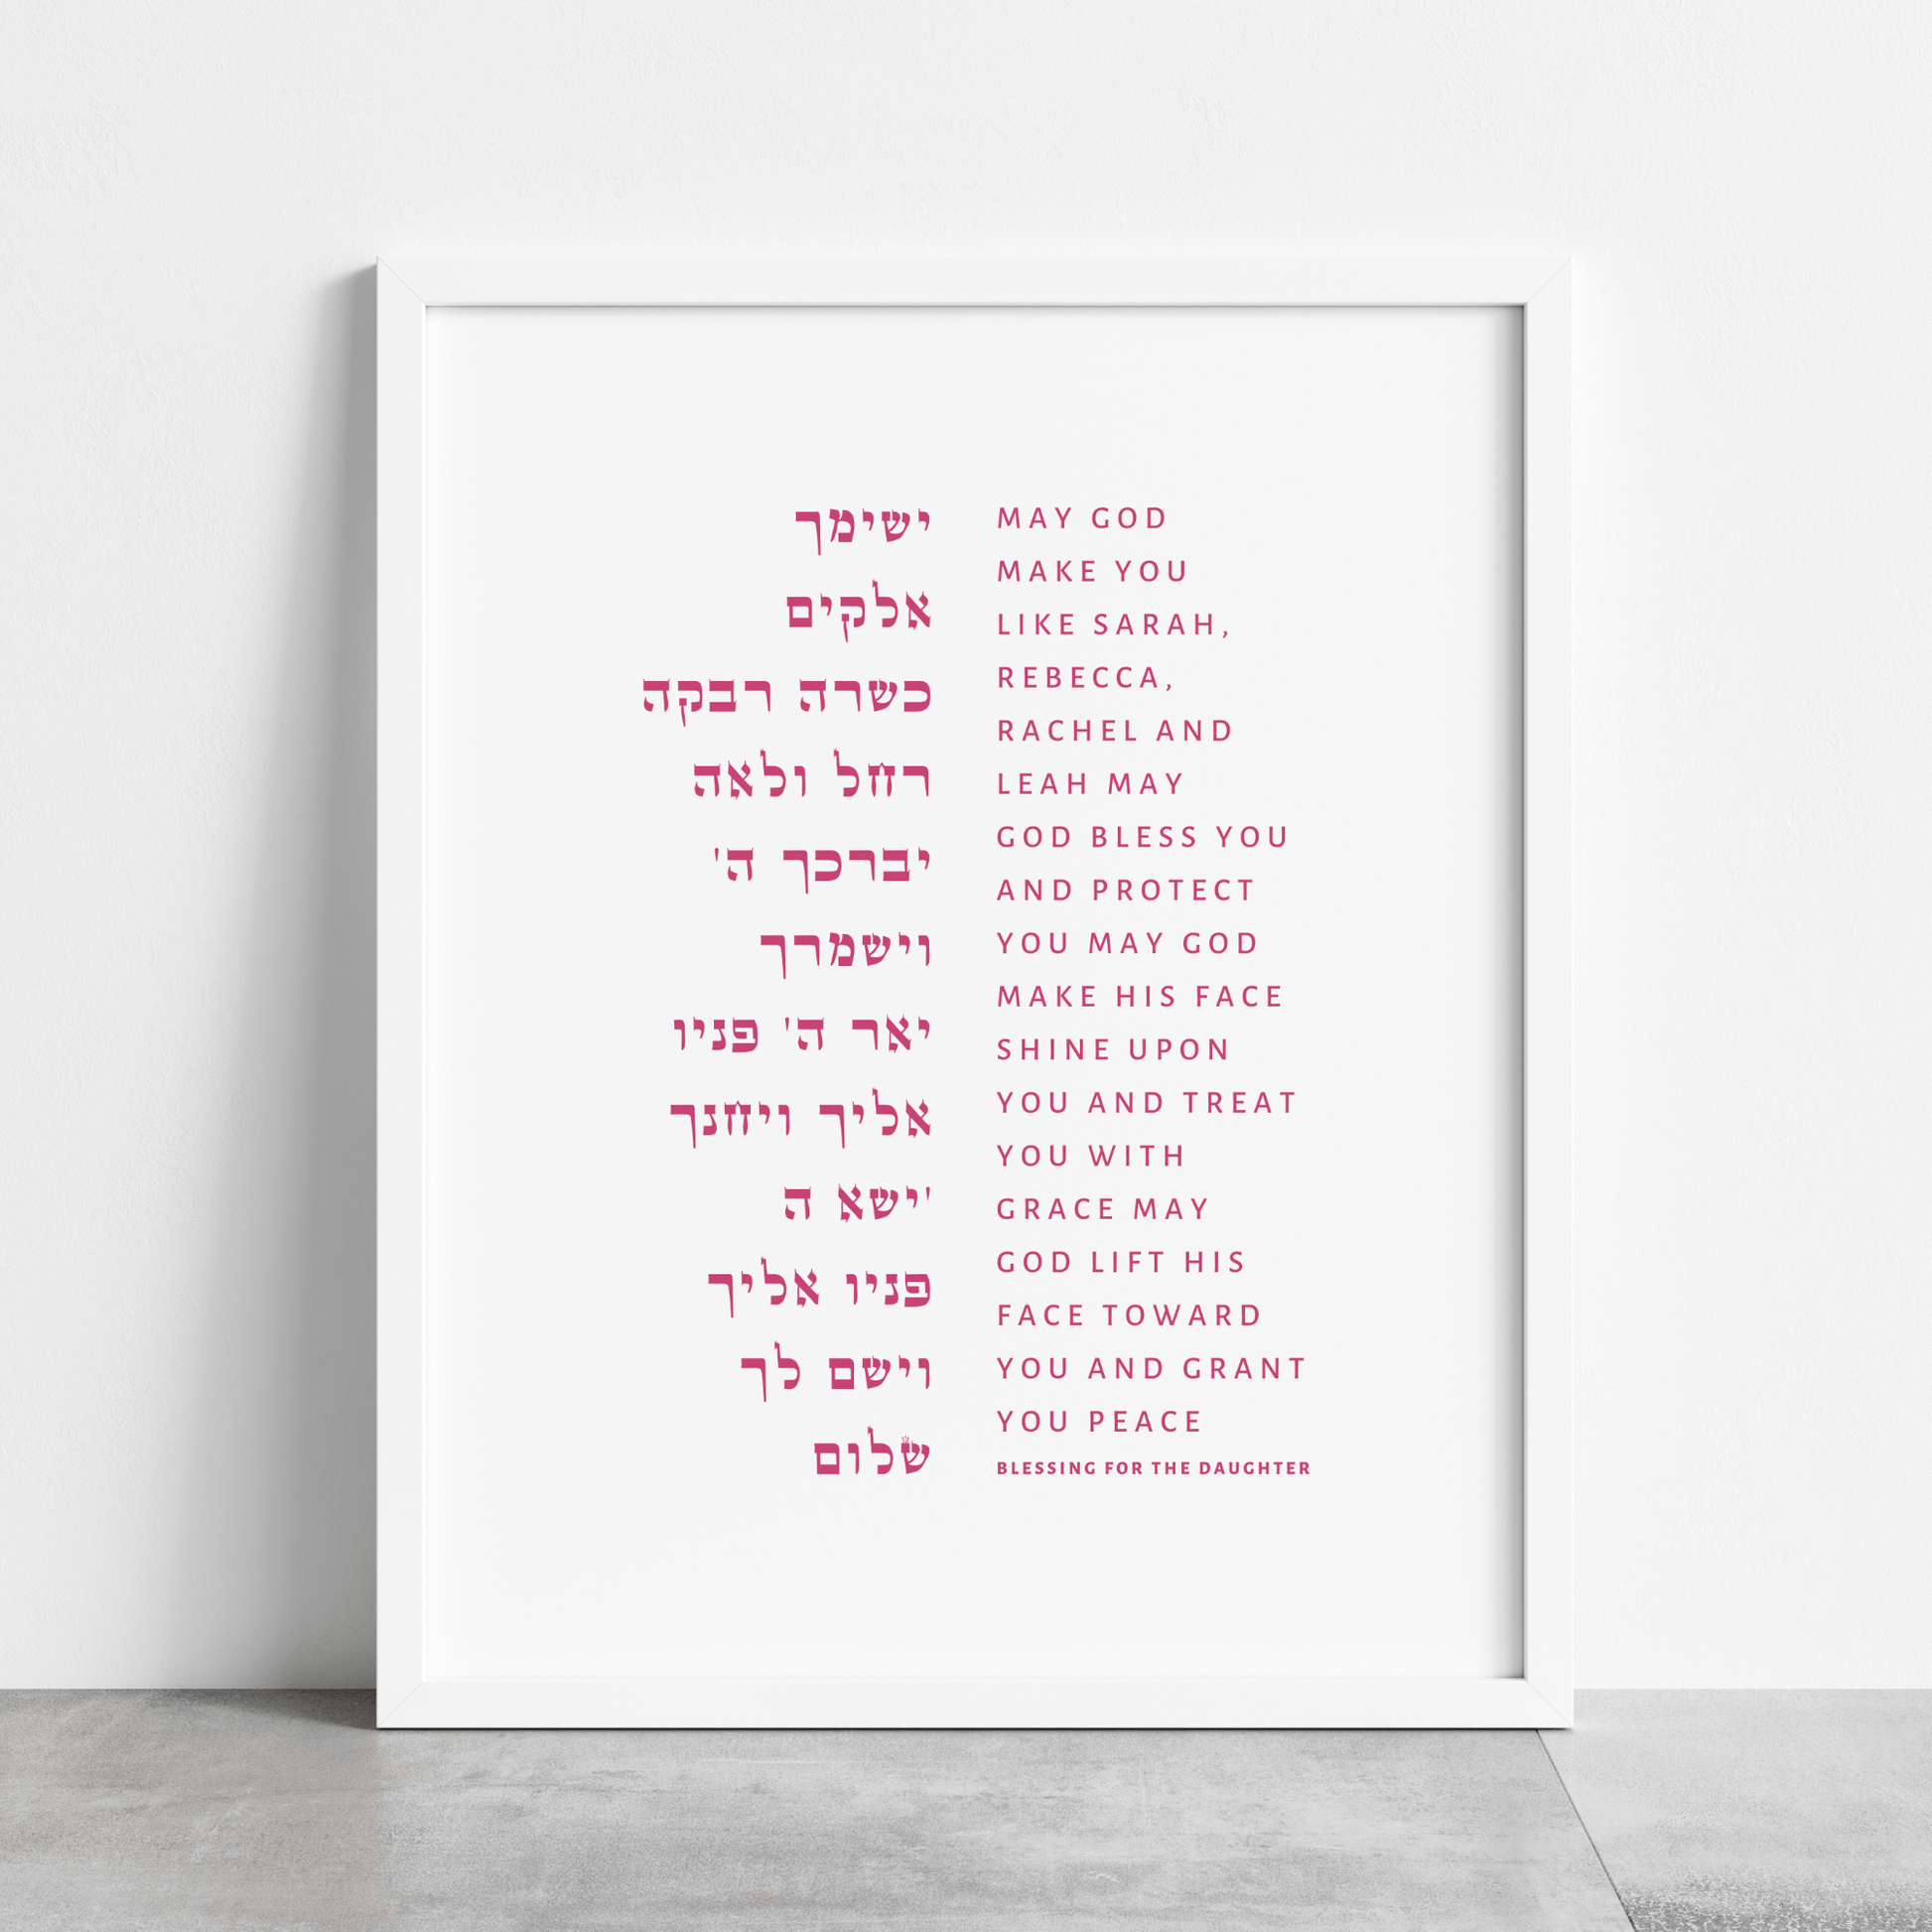 The Verse Birkat HaBanot - Blessing of the Children Prayer - Daughter Birkat HaBanim Blessing of the Children Daughter | Nursery Decor Gift